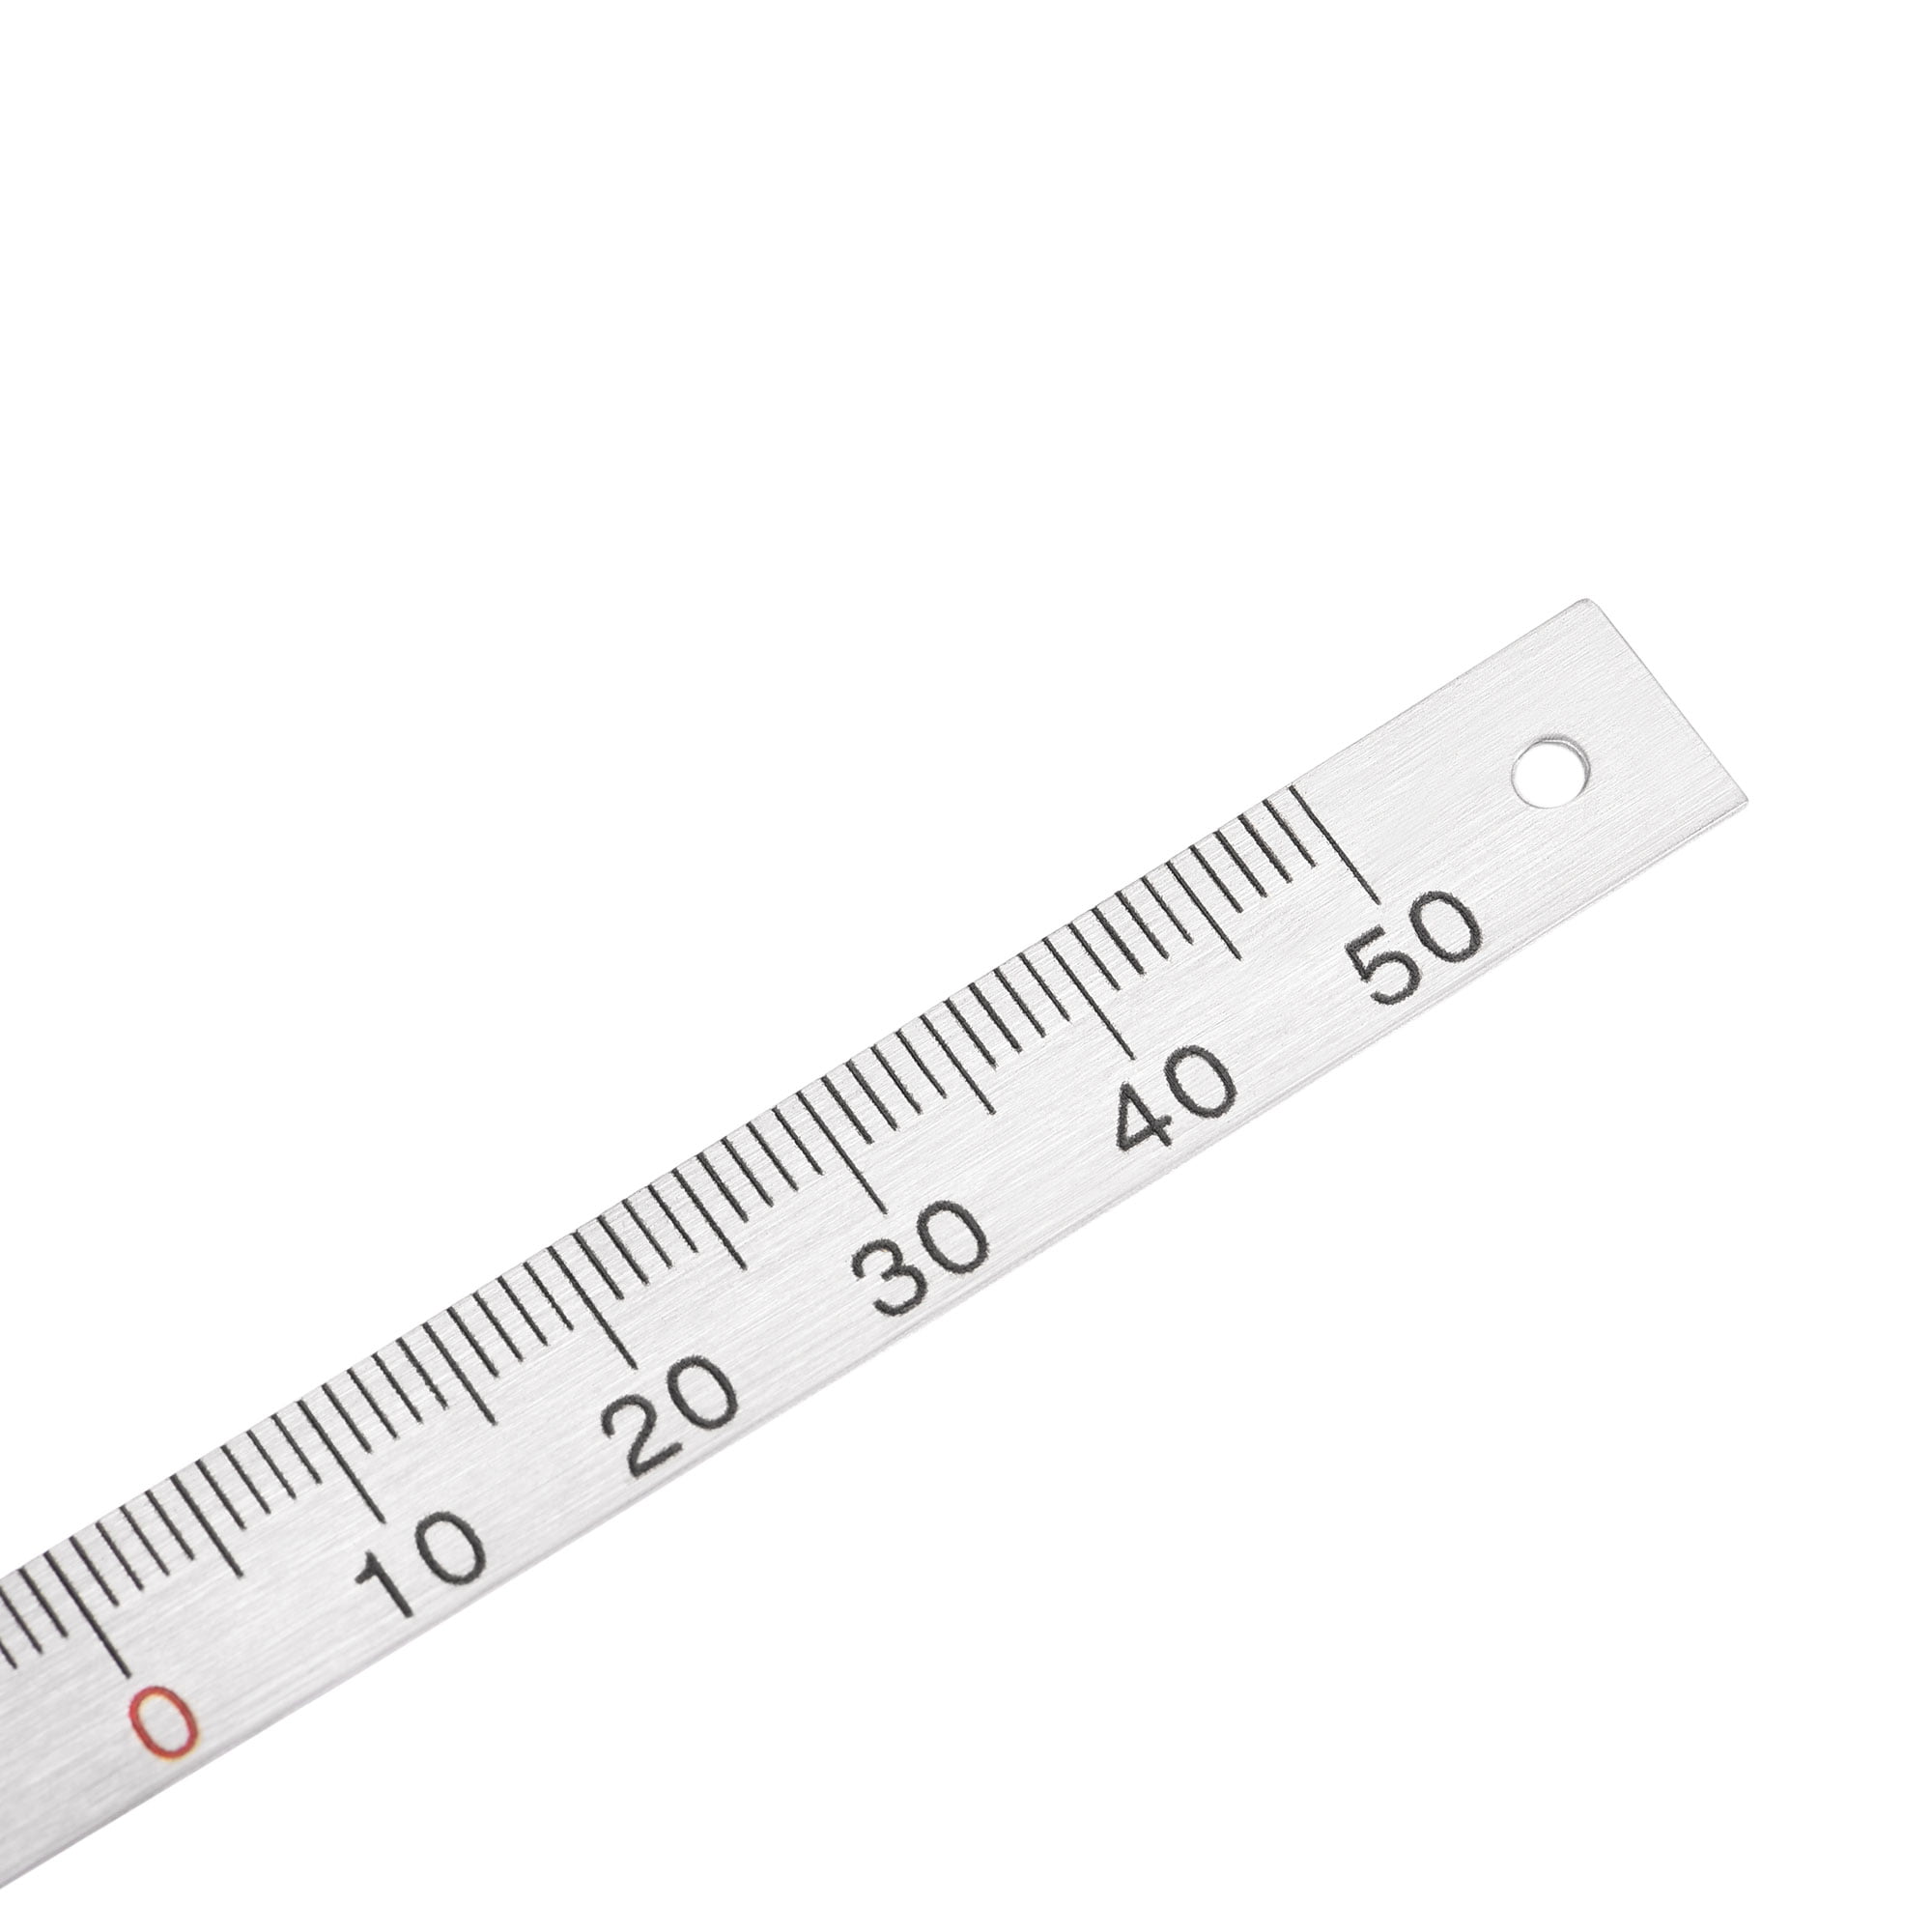 Center Finding Ruler 65mm-0-65mm Table Sticky Adhesive Tape